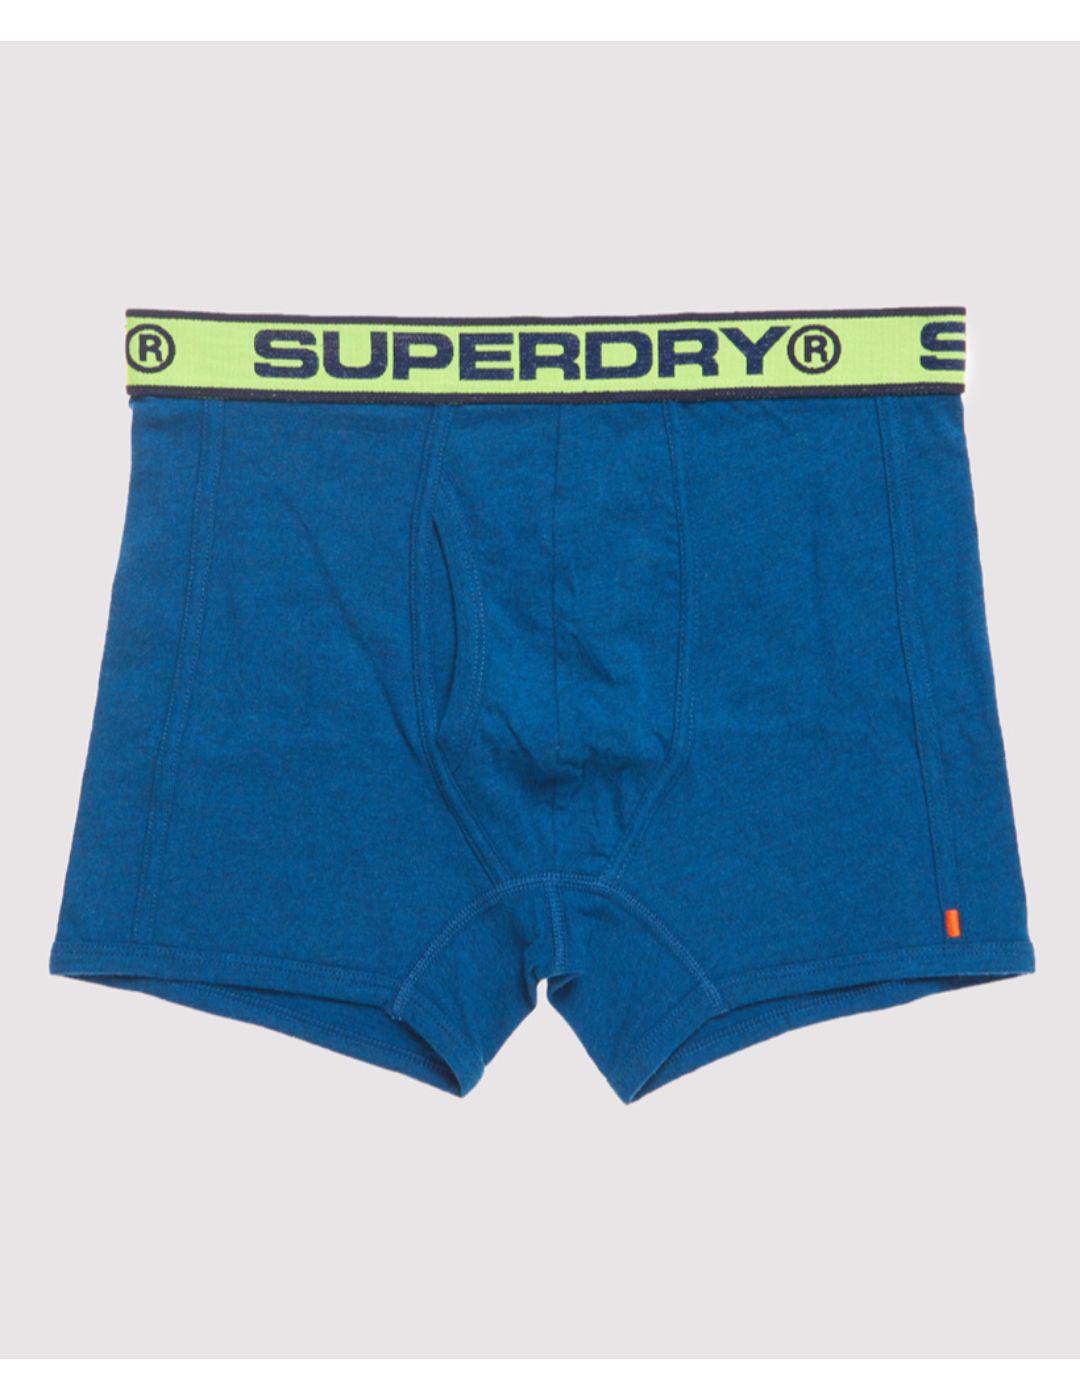 SUPERDRY SPORT BOXER DBL PACK-W